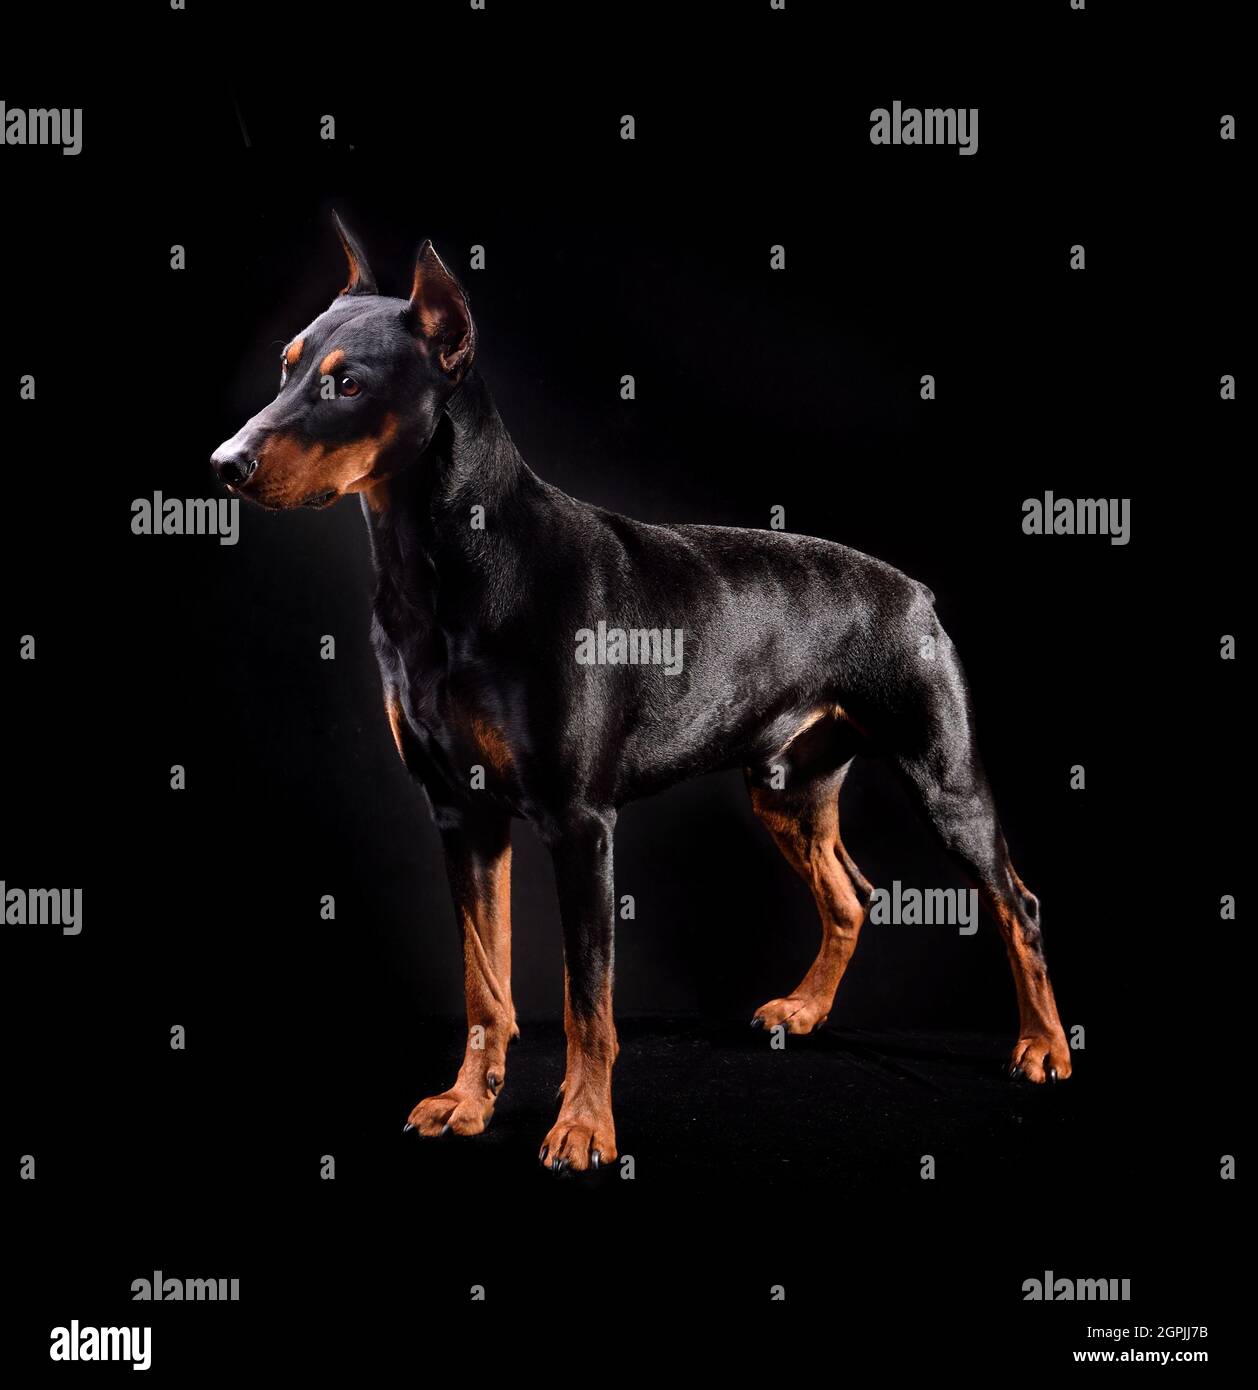 Tan-and-black German Pinscher or Doberman Pinscher standing isolated on a black background Stock Photo